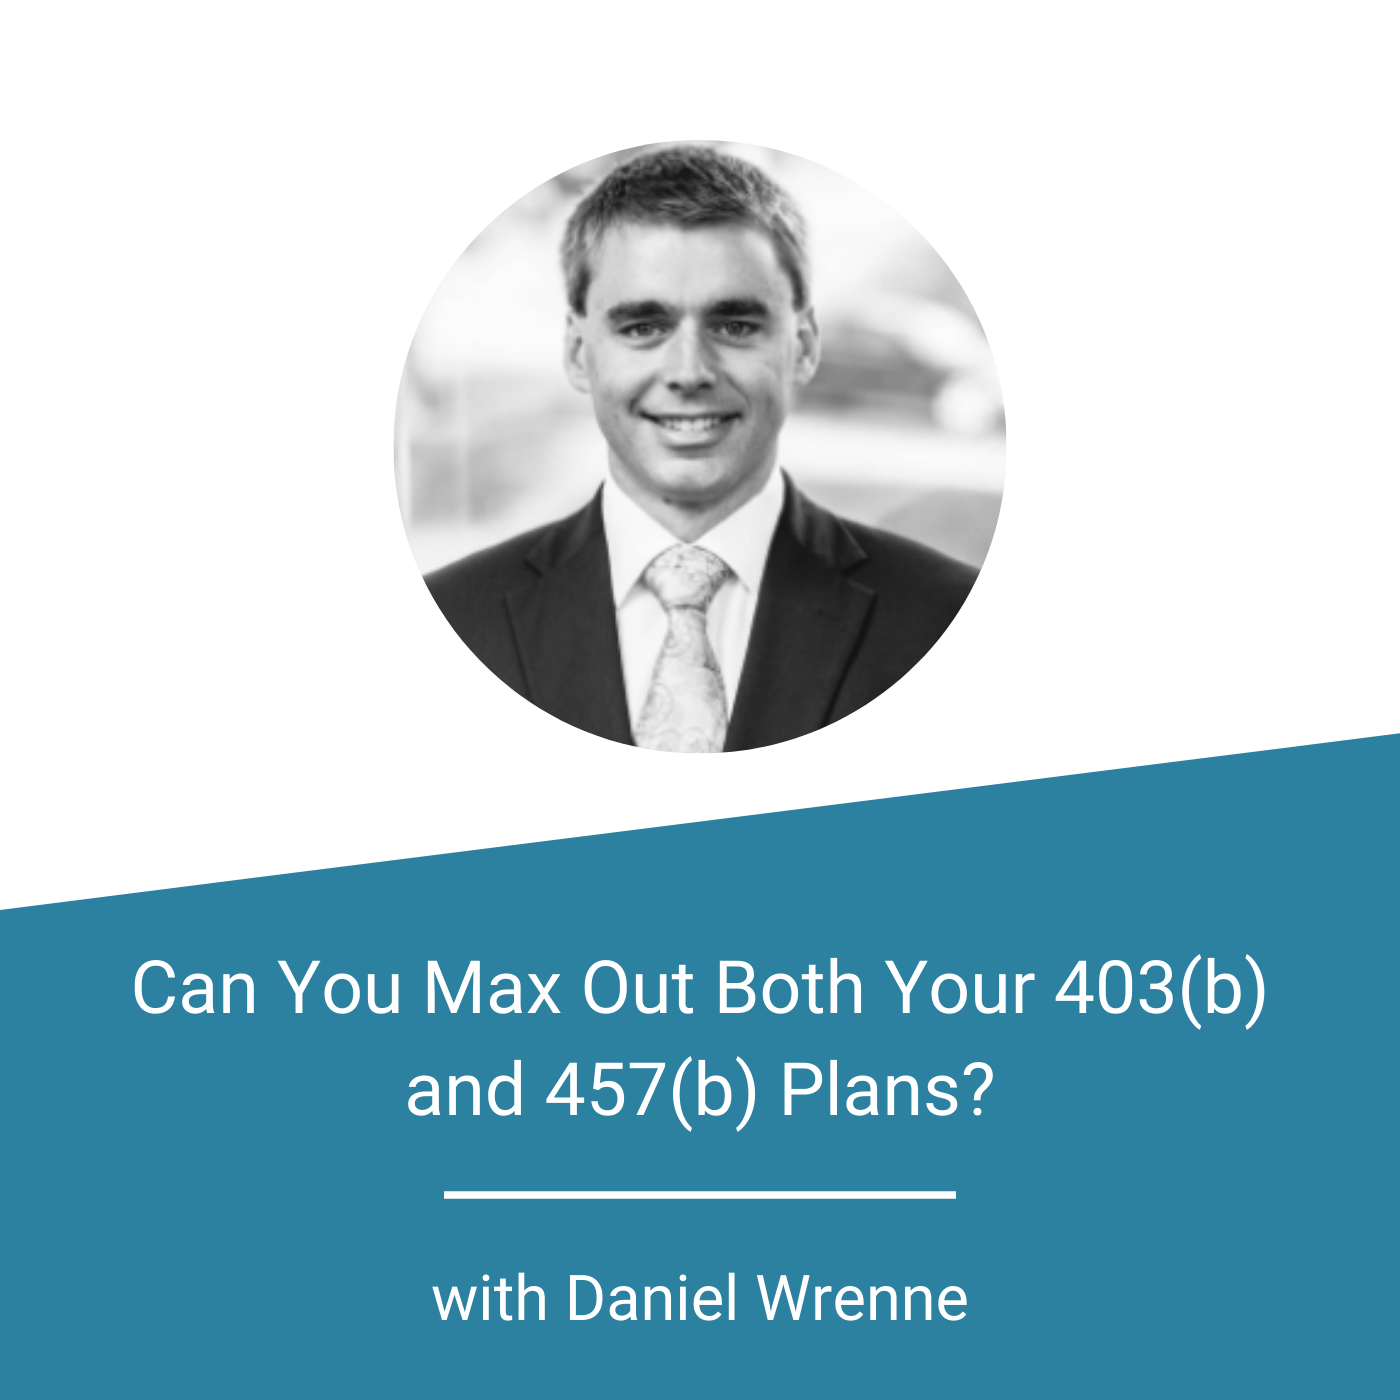 Finance For Physicians - Can You Max Out Both Your 403(b) and 457(b) Plans